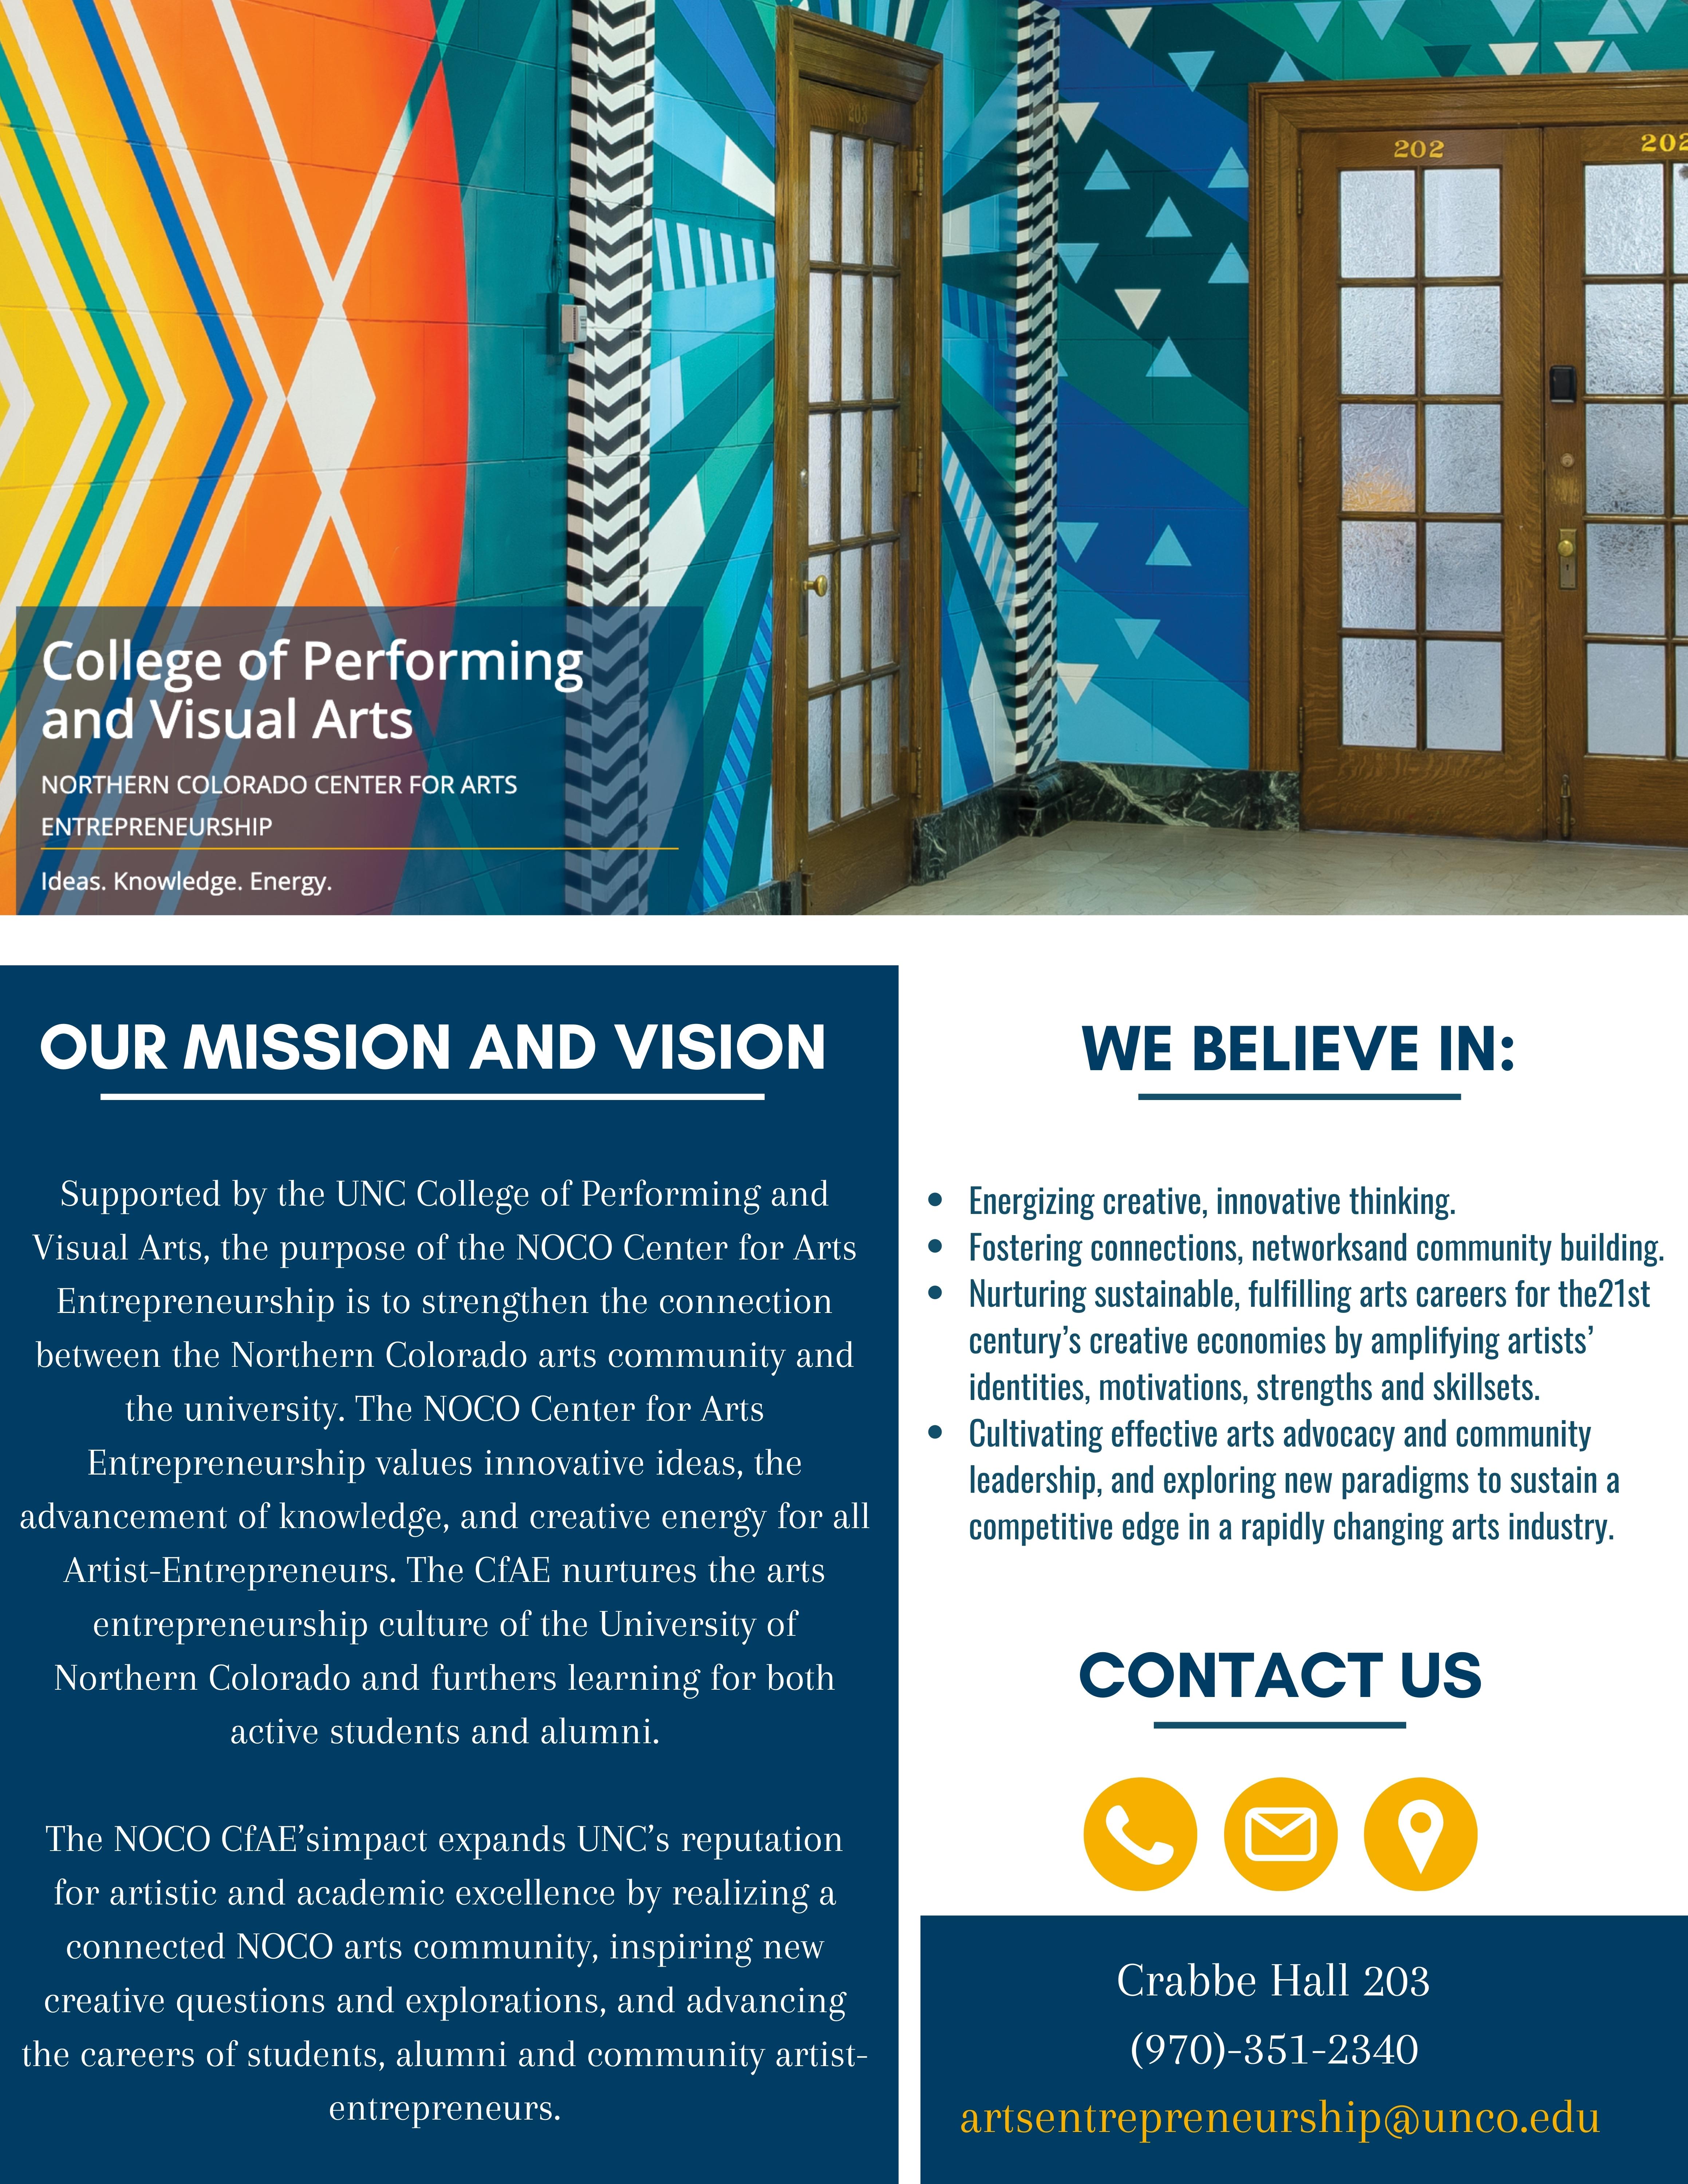 Northern Colorado Center for Arts Entrepreneurship's Mission and Vision Statement | About Us